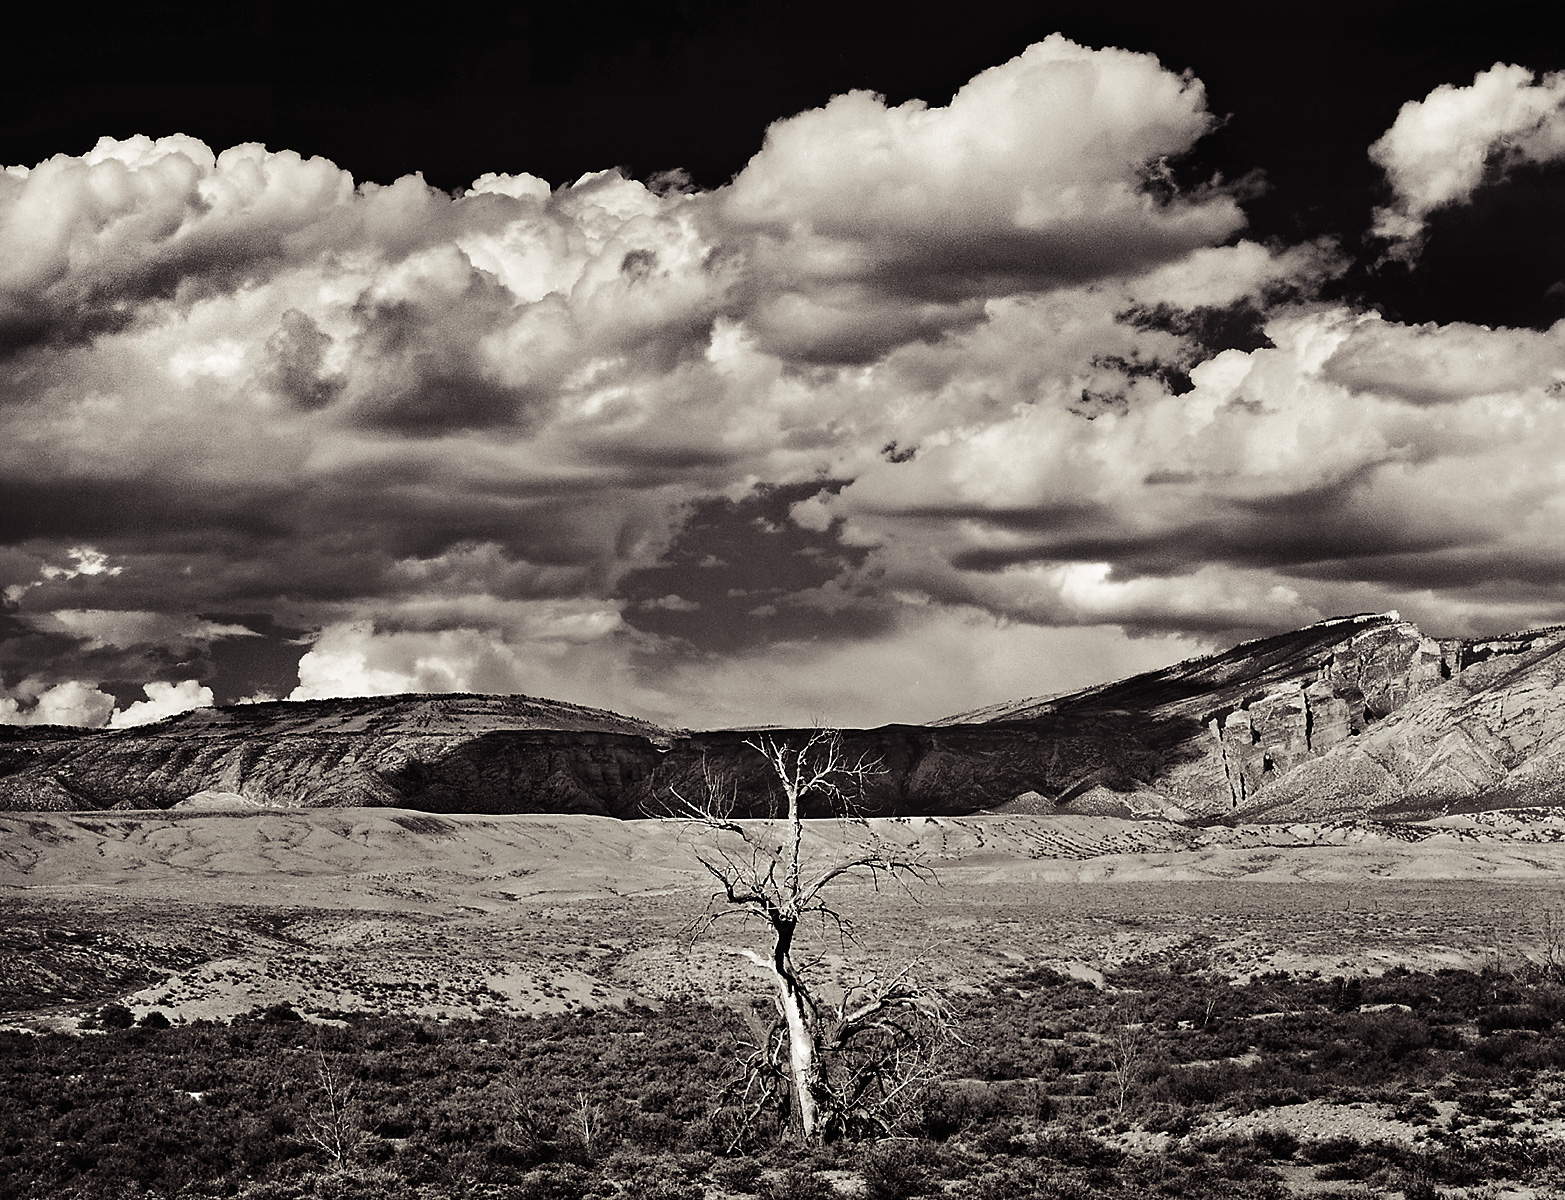 Stephen Austin Welch commercial director & advertising and fine art landscape photographer solitary tree B&W black and white sepia selenium duo-toned photography: moody and dramatic fine art photographs